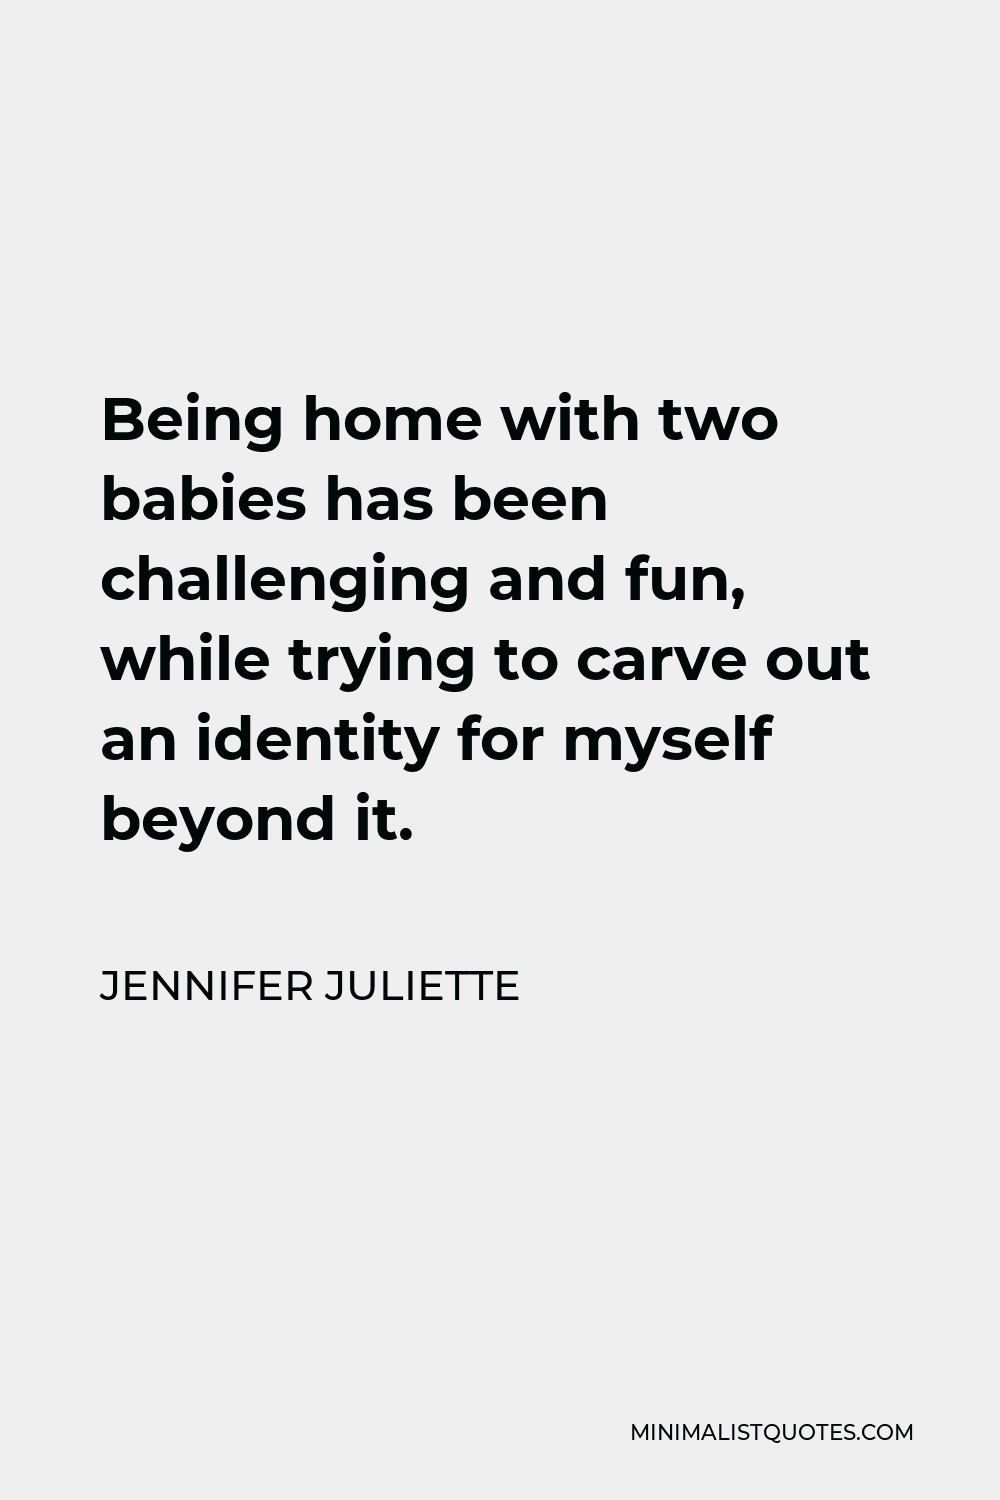 Jennifer Juliette Quote - Being home with two babies has been challenging and fun, while trying to carve out an identity for myself beyond it.